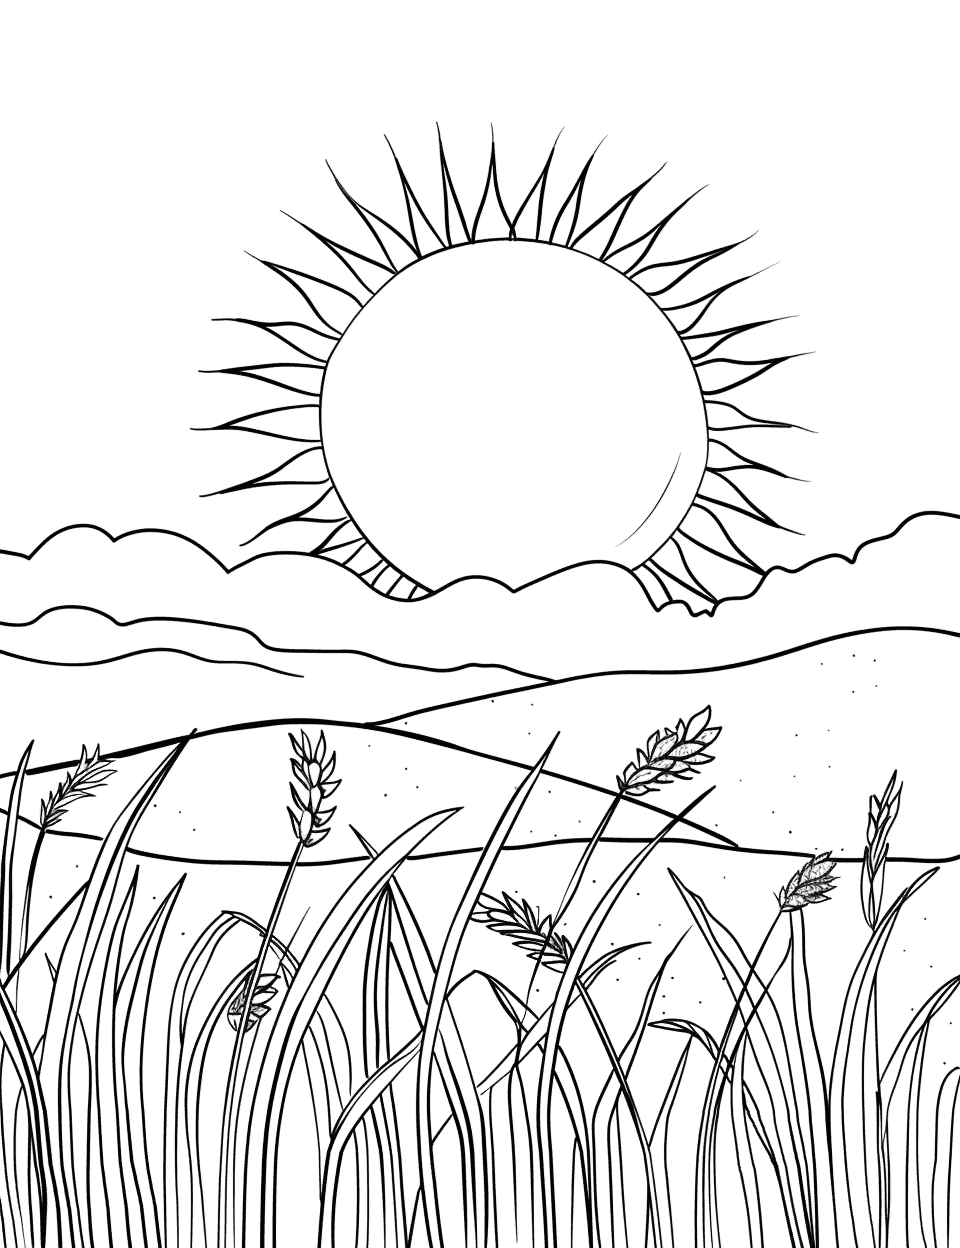 Sun and a Gentle Breeze Coloring Page - The sun shining down on fields with a gentle breeze moving the grass.